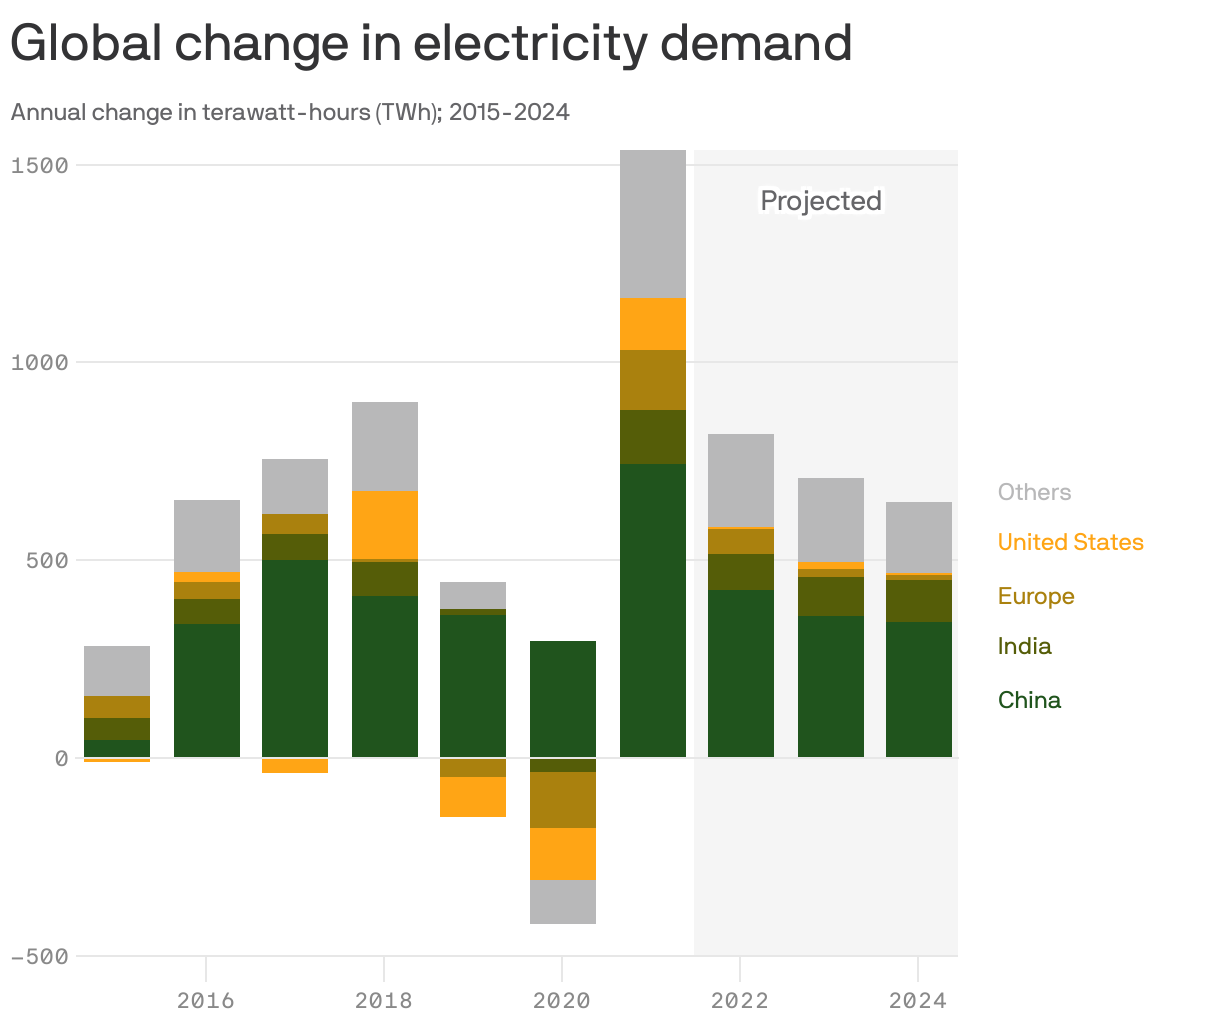 Global change in electricity demand